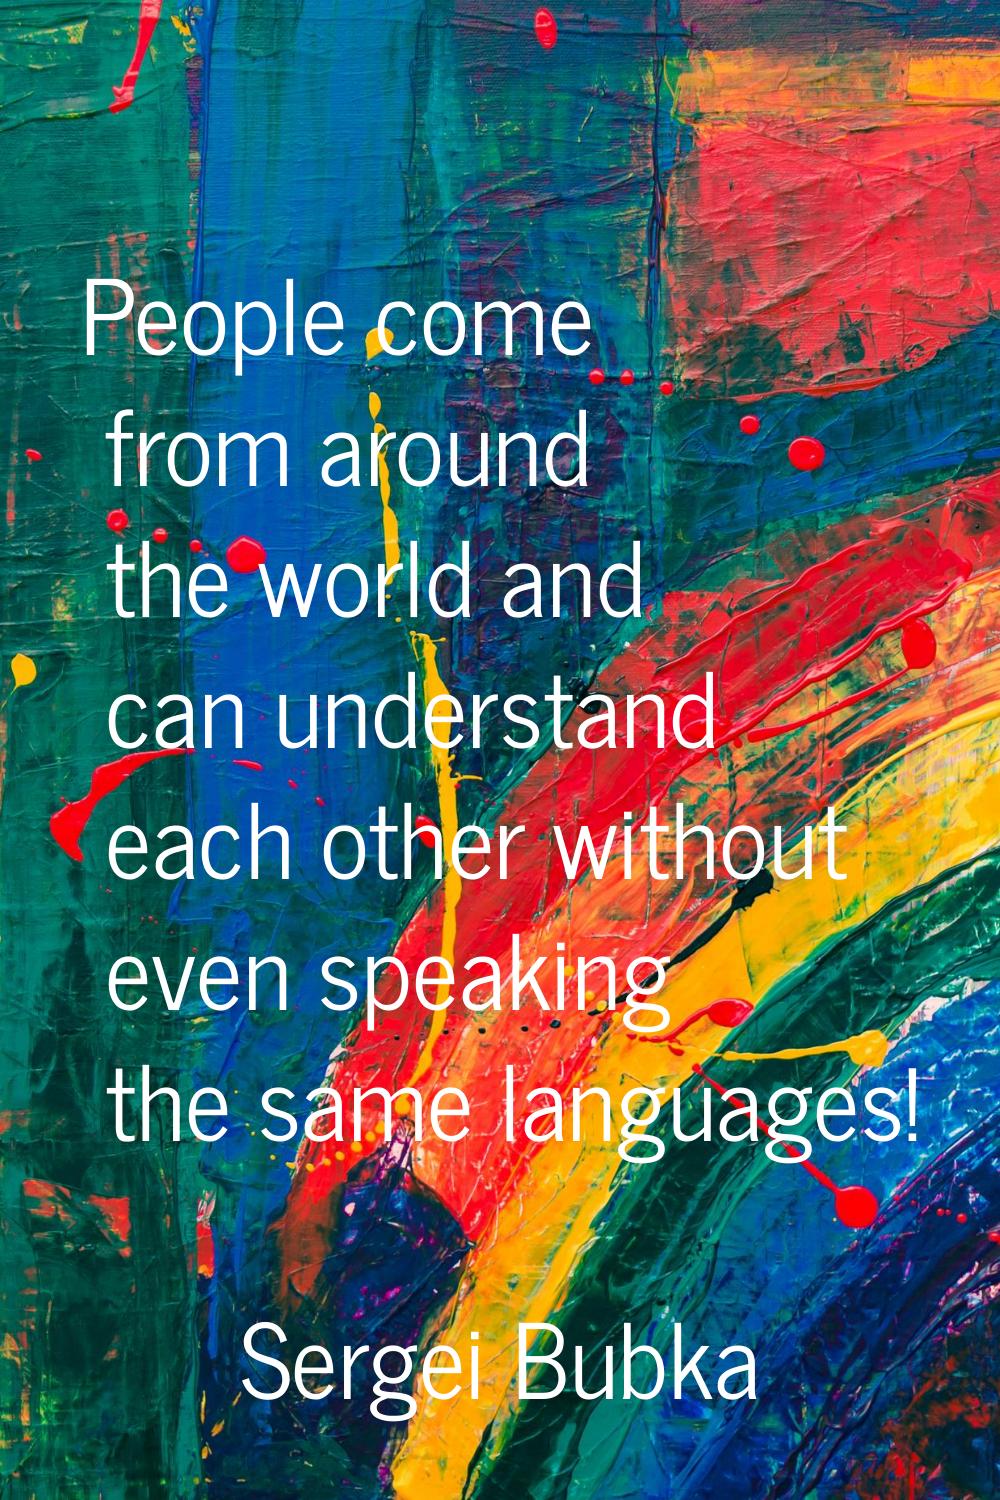 People come from around the world and can understand each other without even speaking the same lang